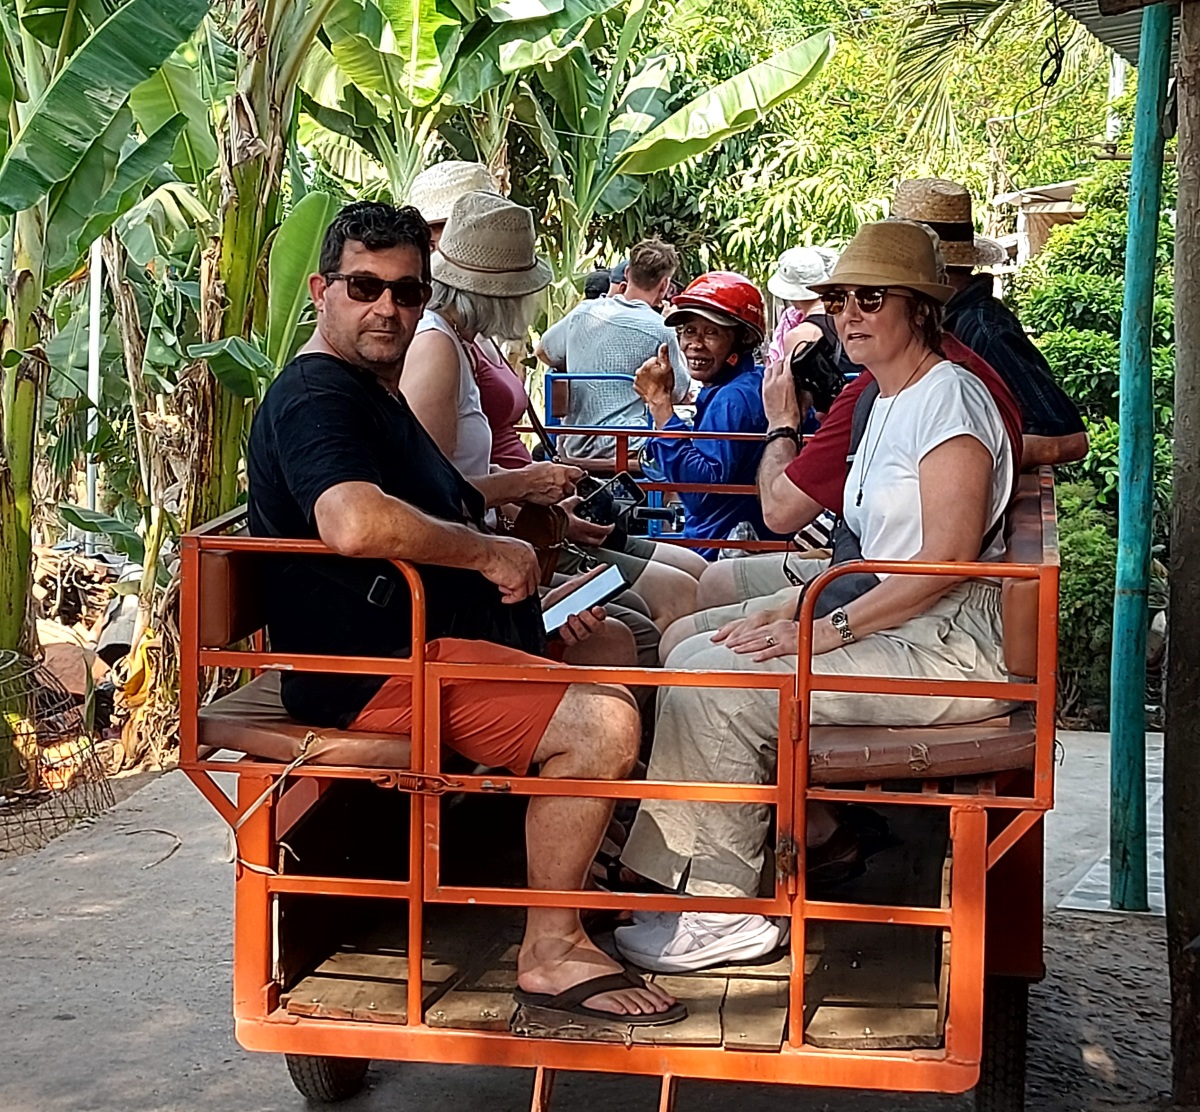 Foreign visitors explore daily life in Mekong Delta